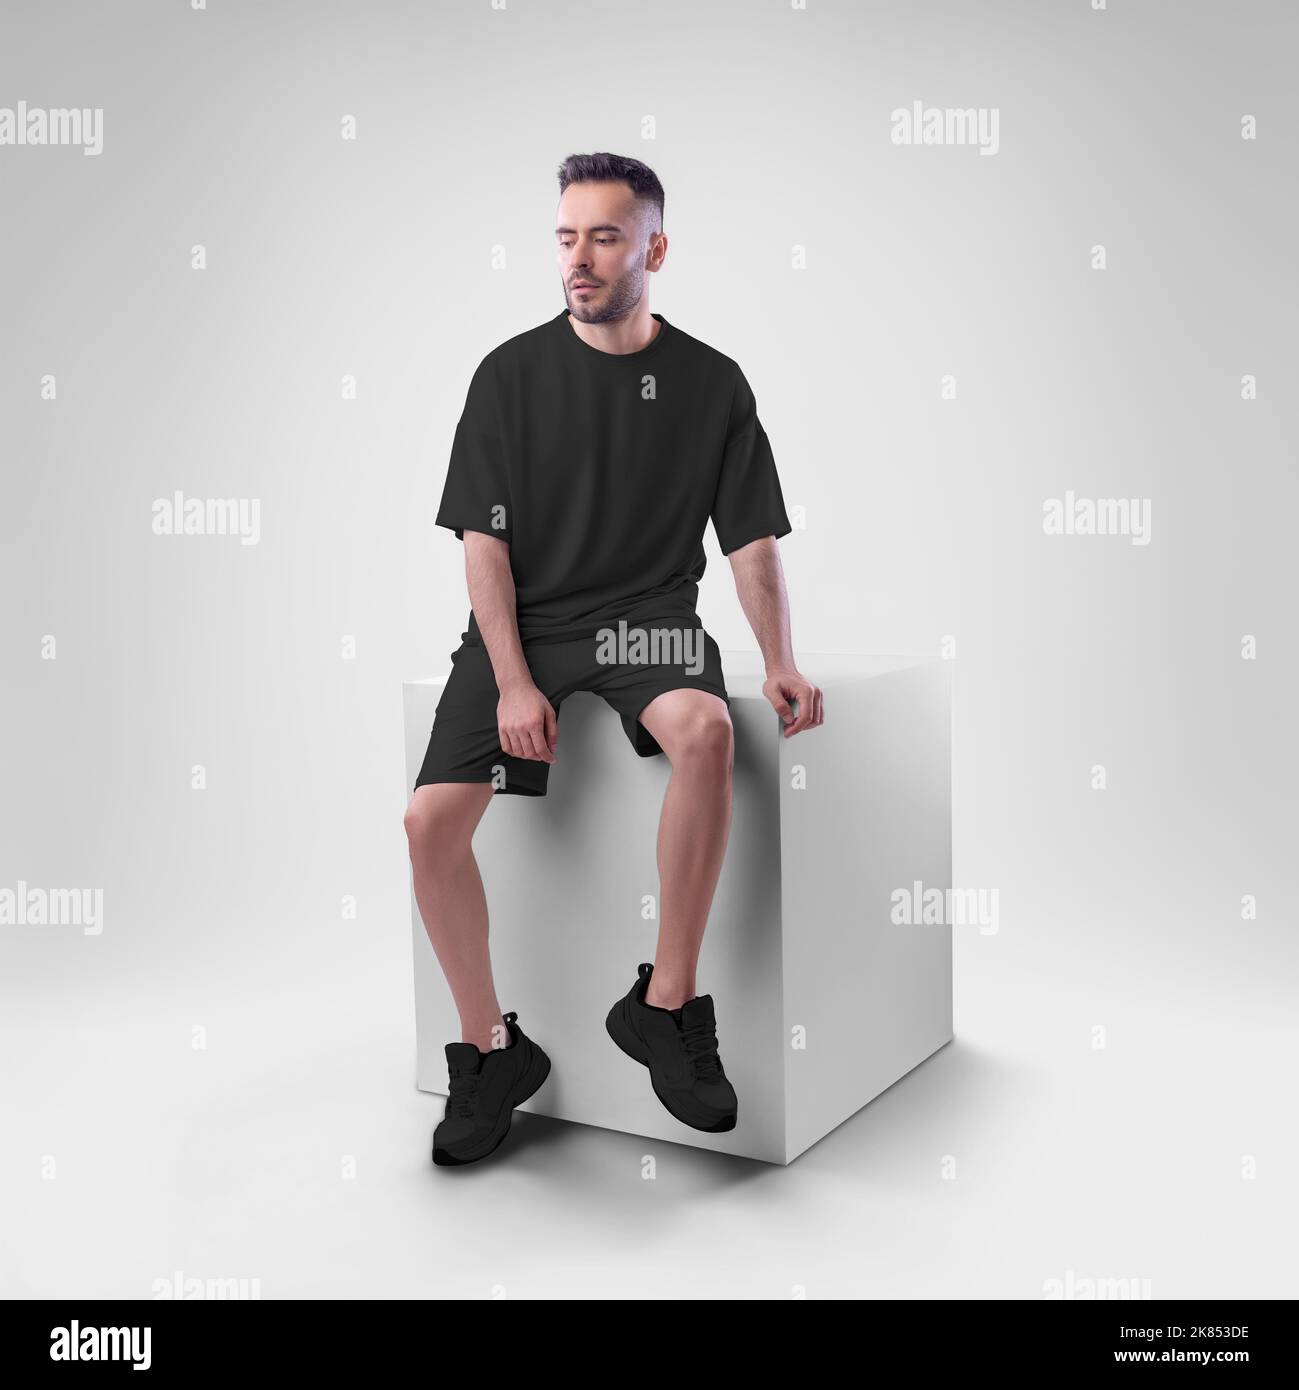 Mockup of black men's suit oversized t-shirt on shorts on man on cube. Clothing template for presentations of design, print, pattern. Stock Photo